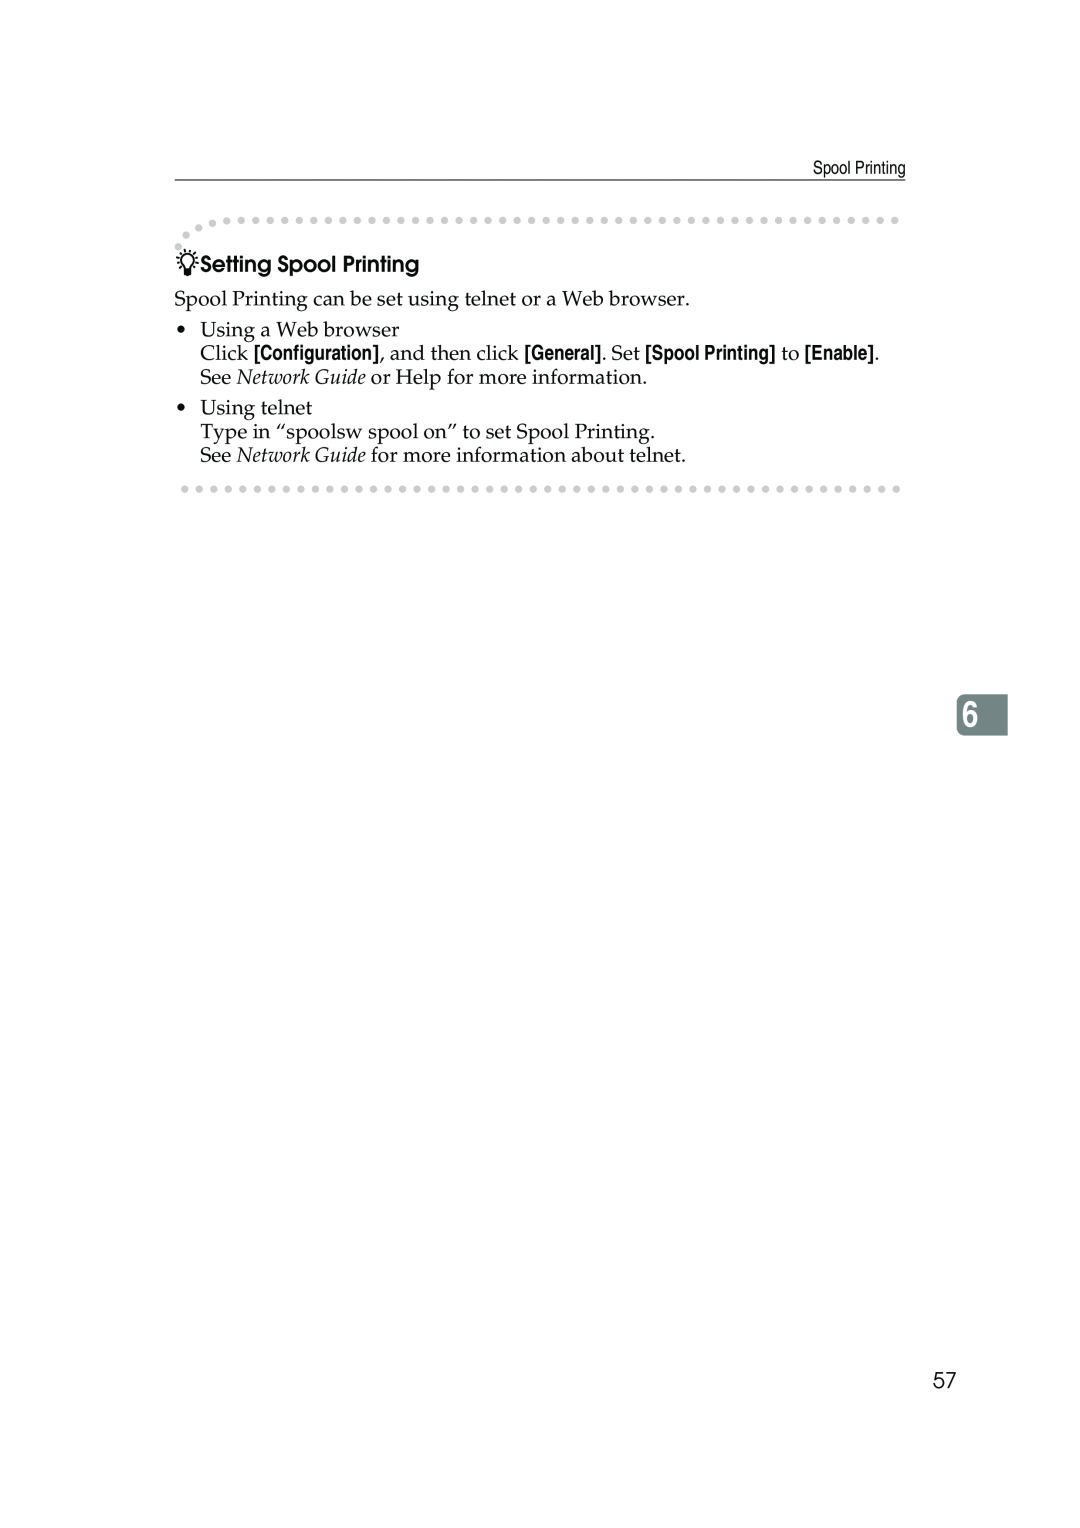 Xerox 2045e appendix Setting Spool Printing, Spool Printing can be set using telnet or a Web browser, Using a Web browser 